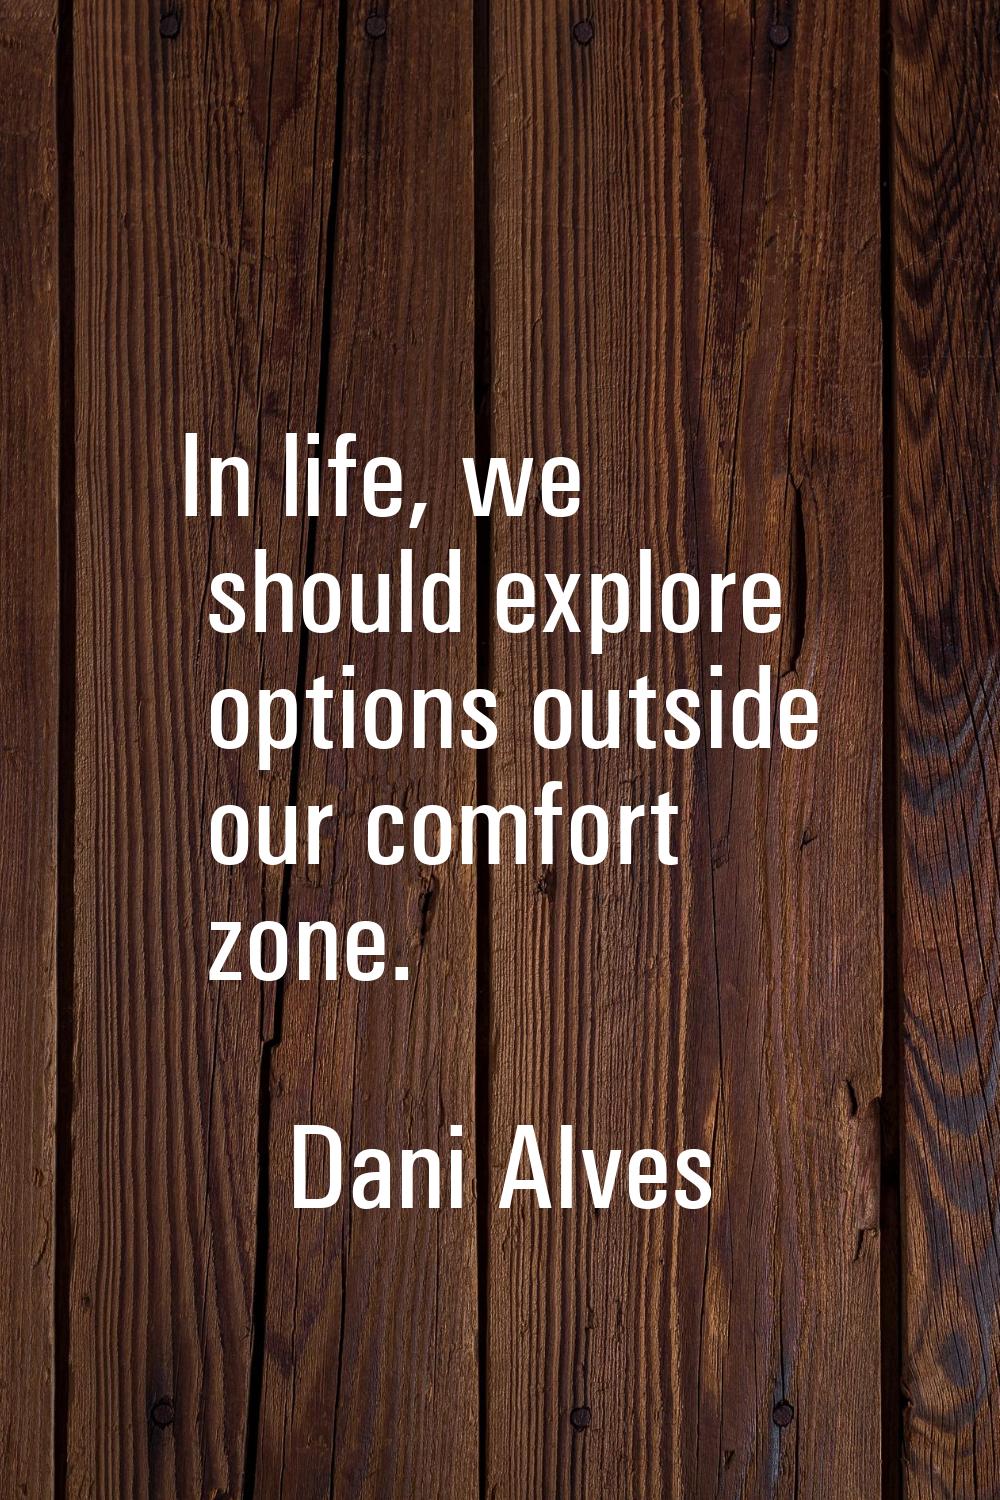 In life, we should explore options outside our comfort zone.